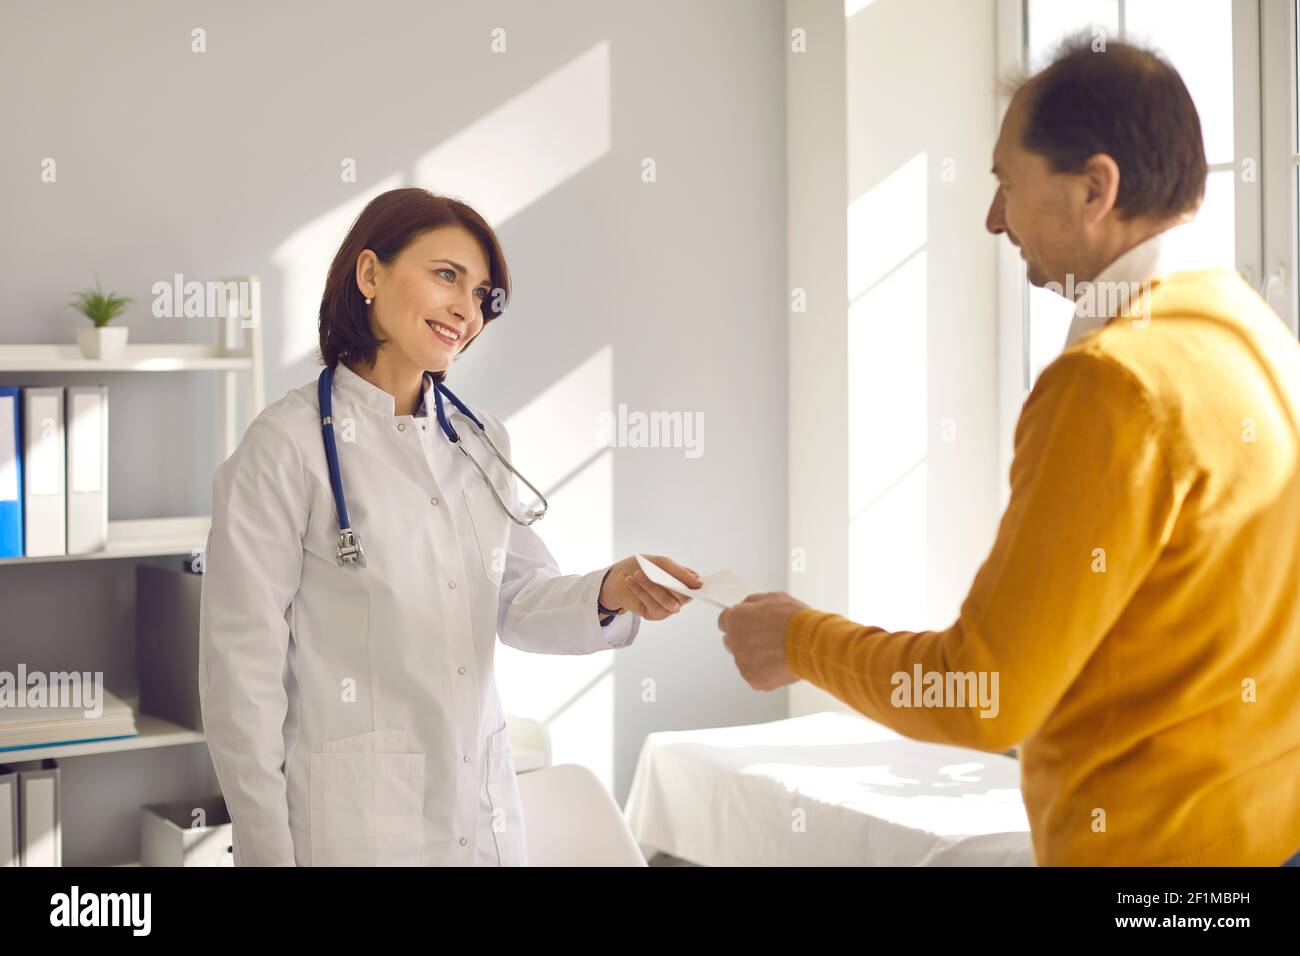 Female doctor giving medical prescription or certificate to middle aged patient Stock Photo